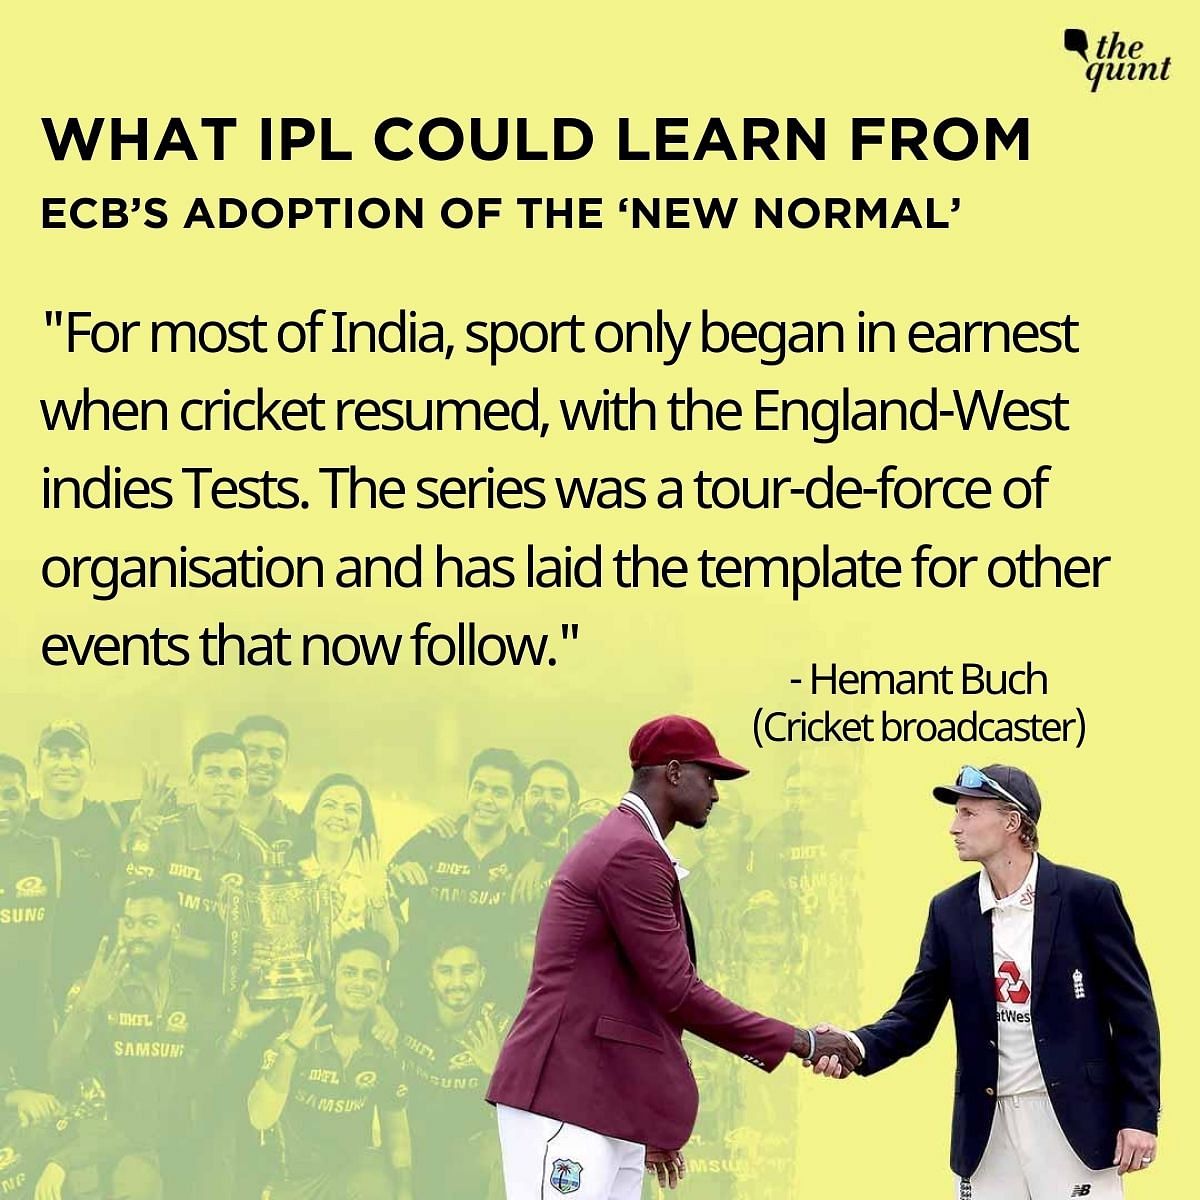 While having the IPL is a welcome move, it will be a huge logistical task to set up a system in a different country.